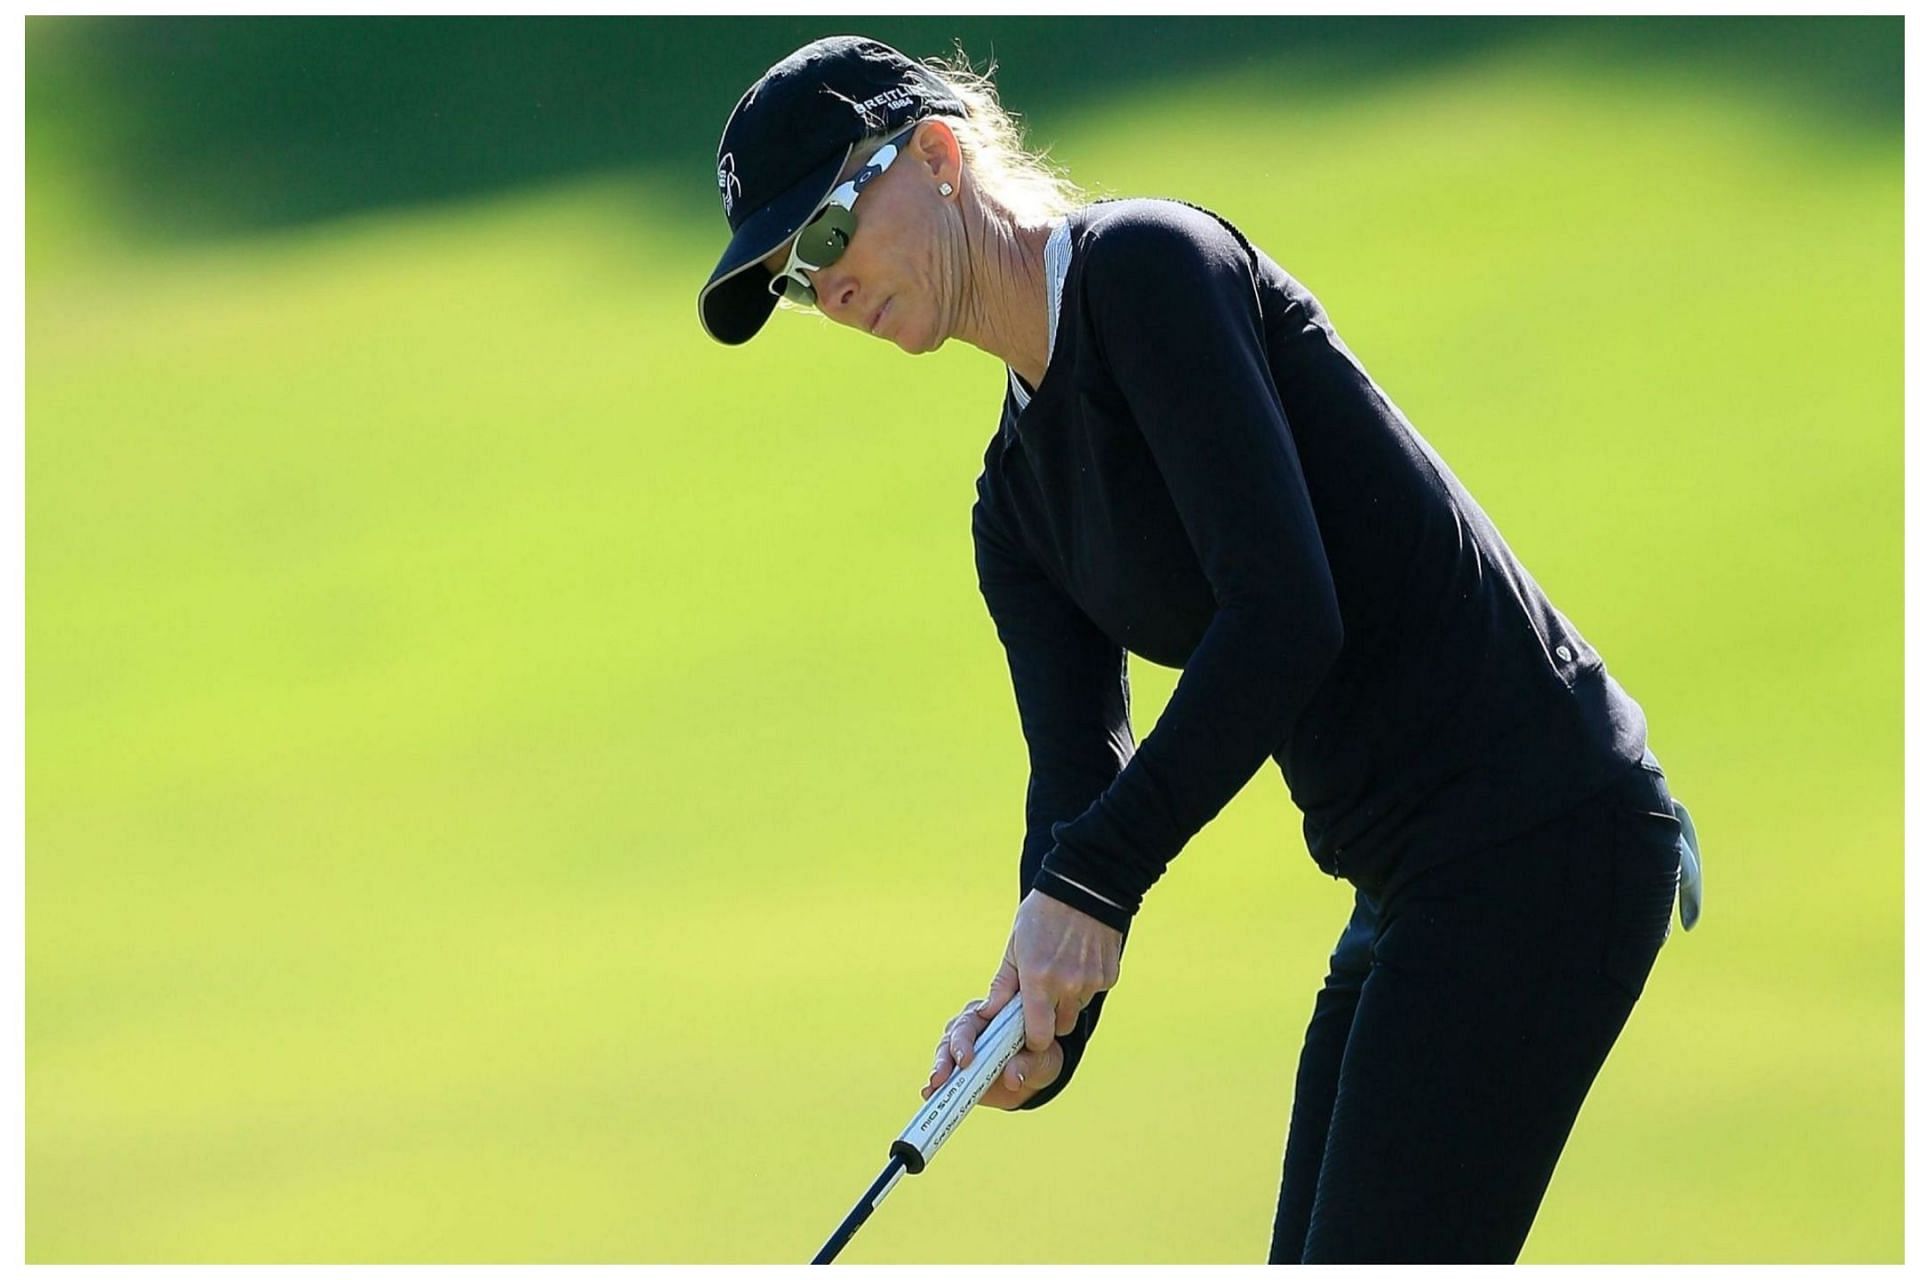 Janet Gretzky during 2014 BMW Charity Pro-Am